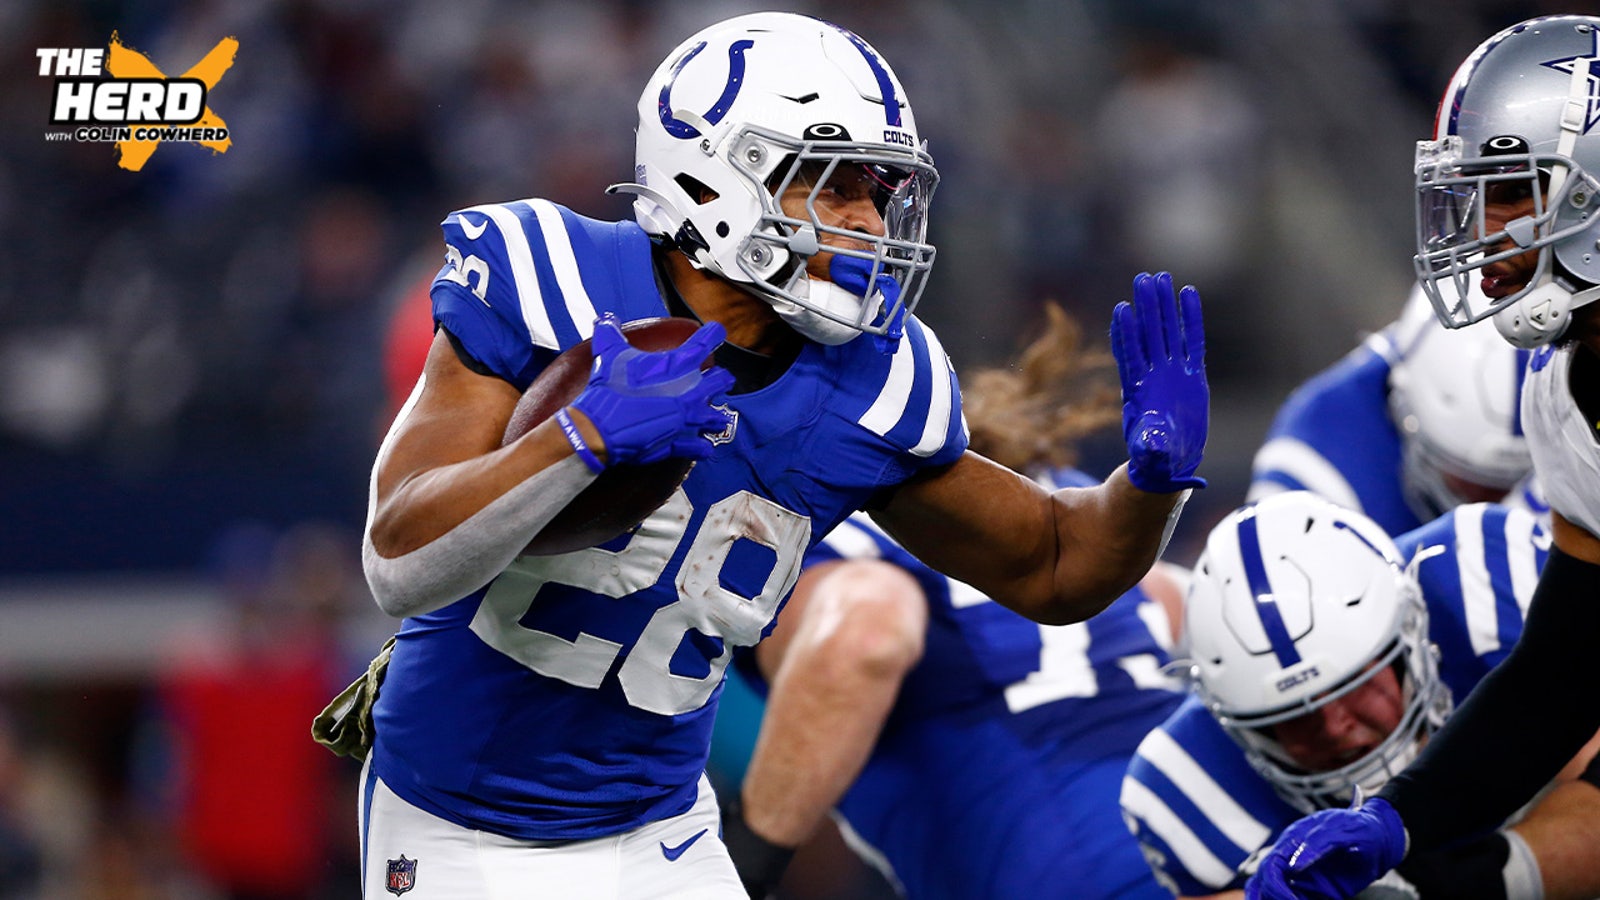 Beryl TV play-697f8013700102c--h_1692726329575 Five potential trade destinations for Colts RB Jonathan Taylor Sports 